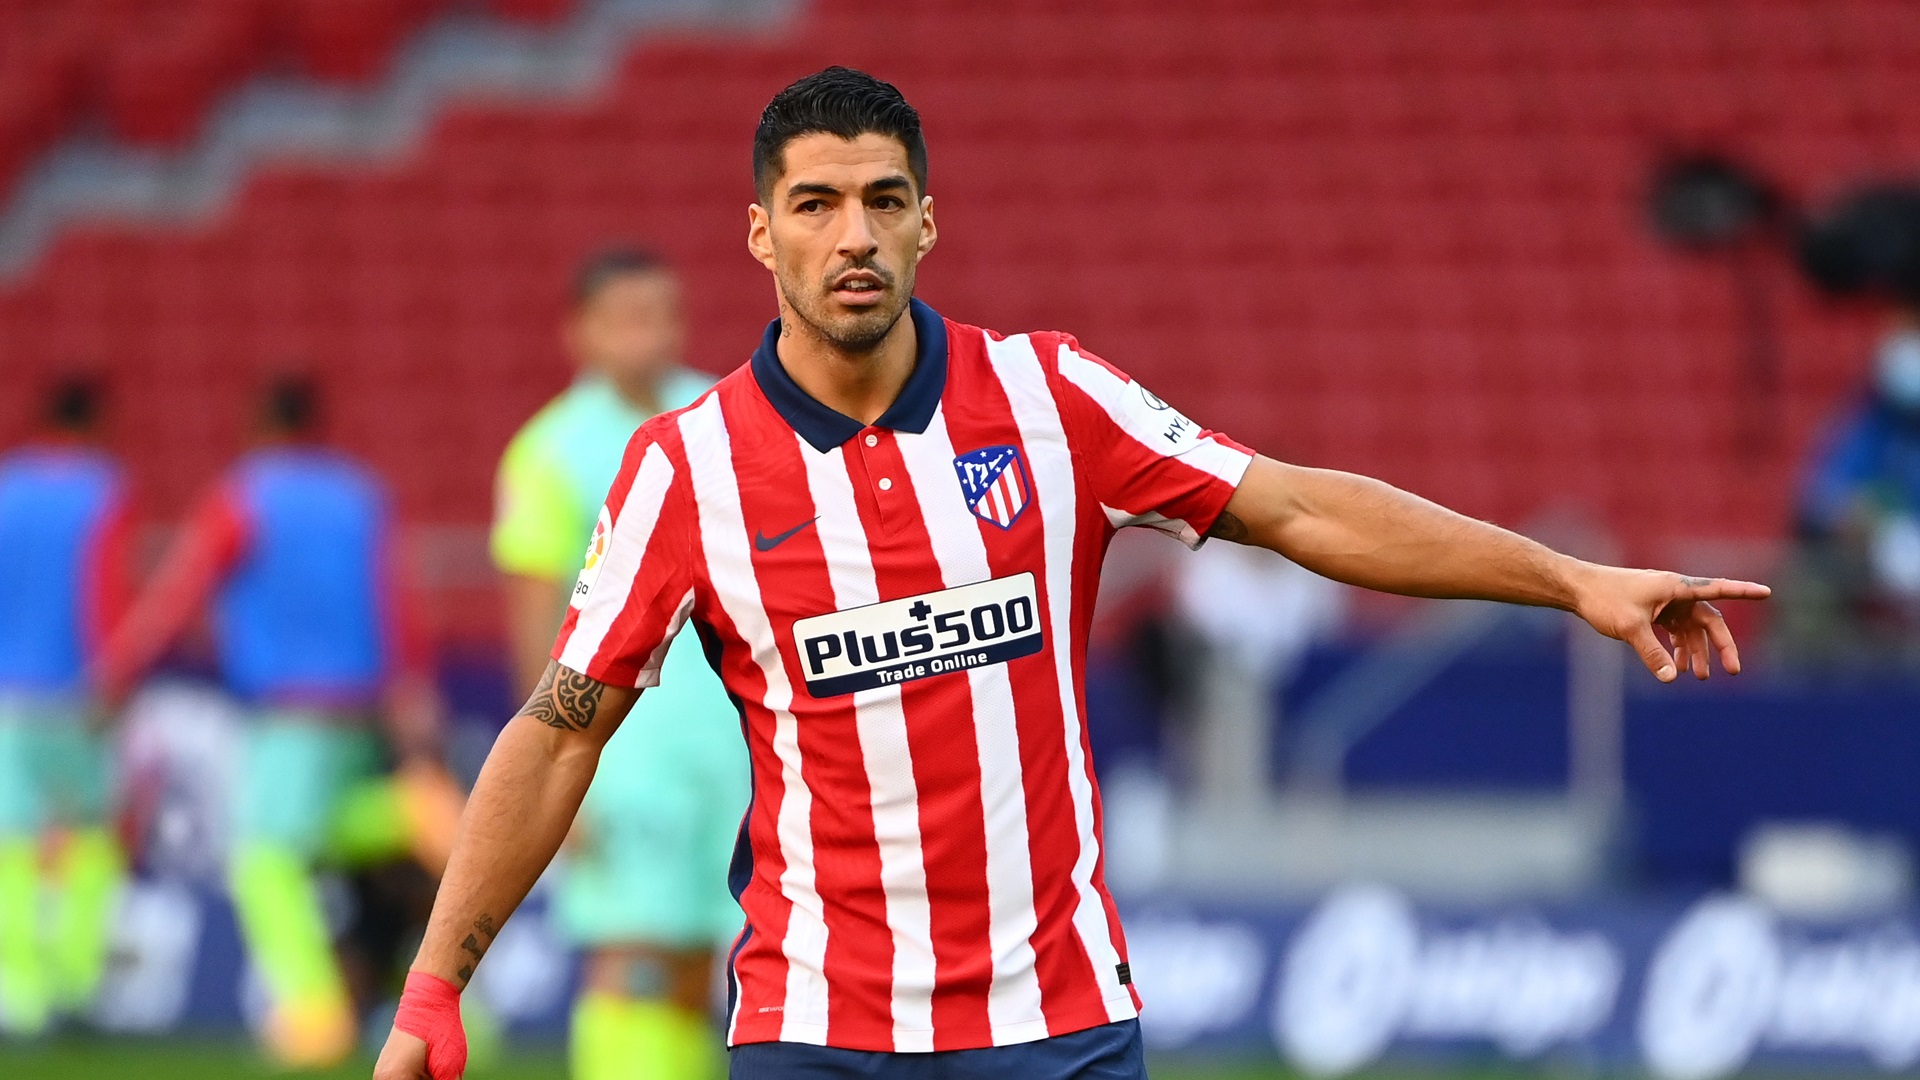 Atletico Madrid's Luis Suarez tests positive again for Covid-19 and will miss reunion against Barcelona - Football Espana